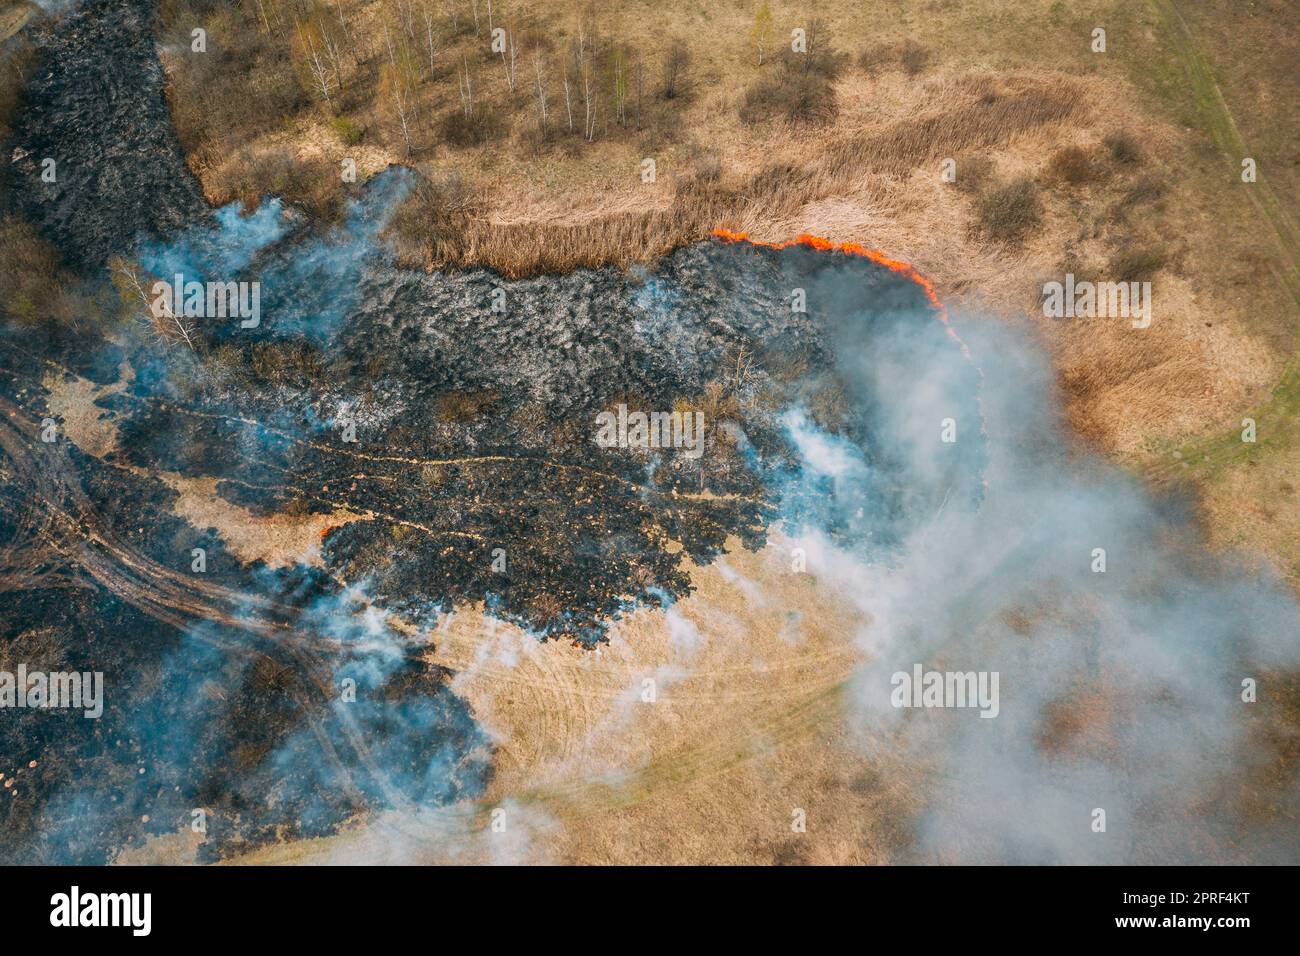 Aerial View. Dry Grass Burns During Drought And Hot Weather. Bush Fire And Smoke In Meadow Field. Wild Open Fire Destroys Grass. Nature In Danger. Ecological Problem Air Pollution. Natural Disaster Stock Photo